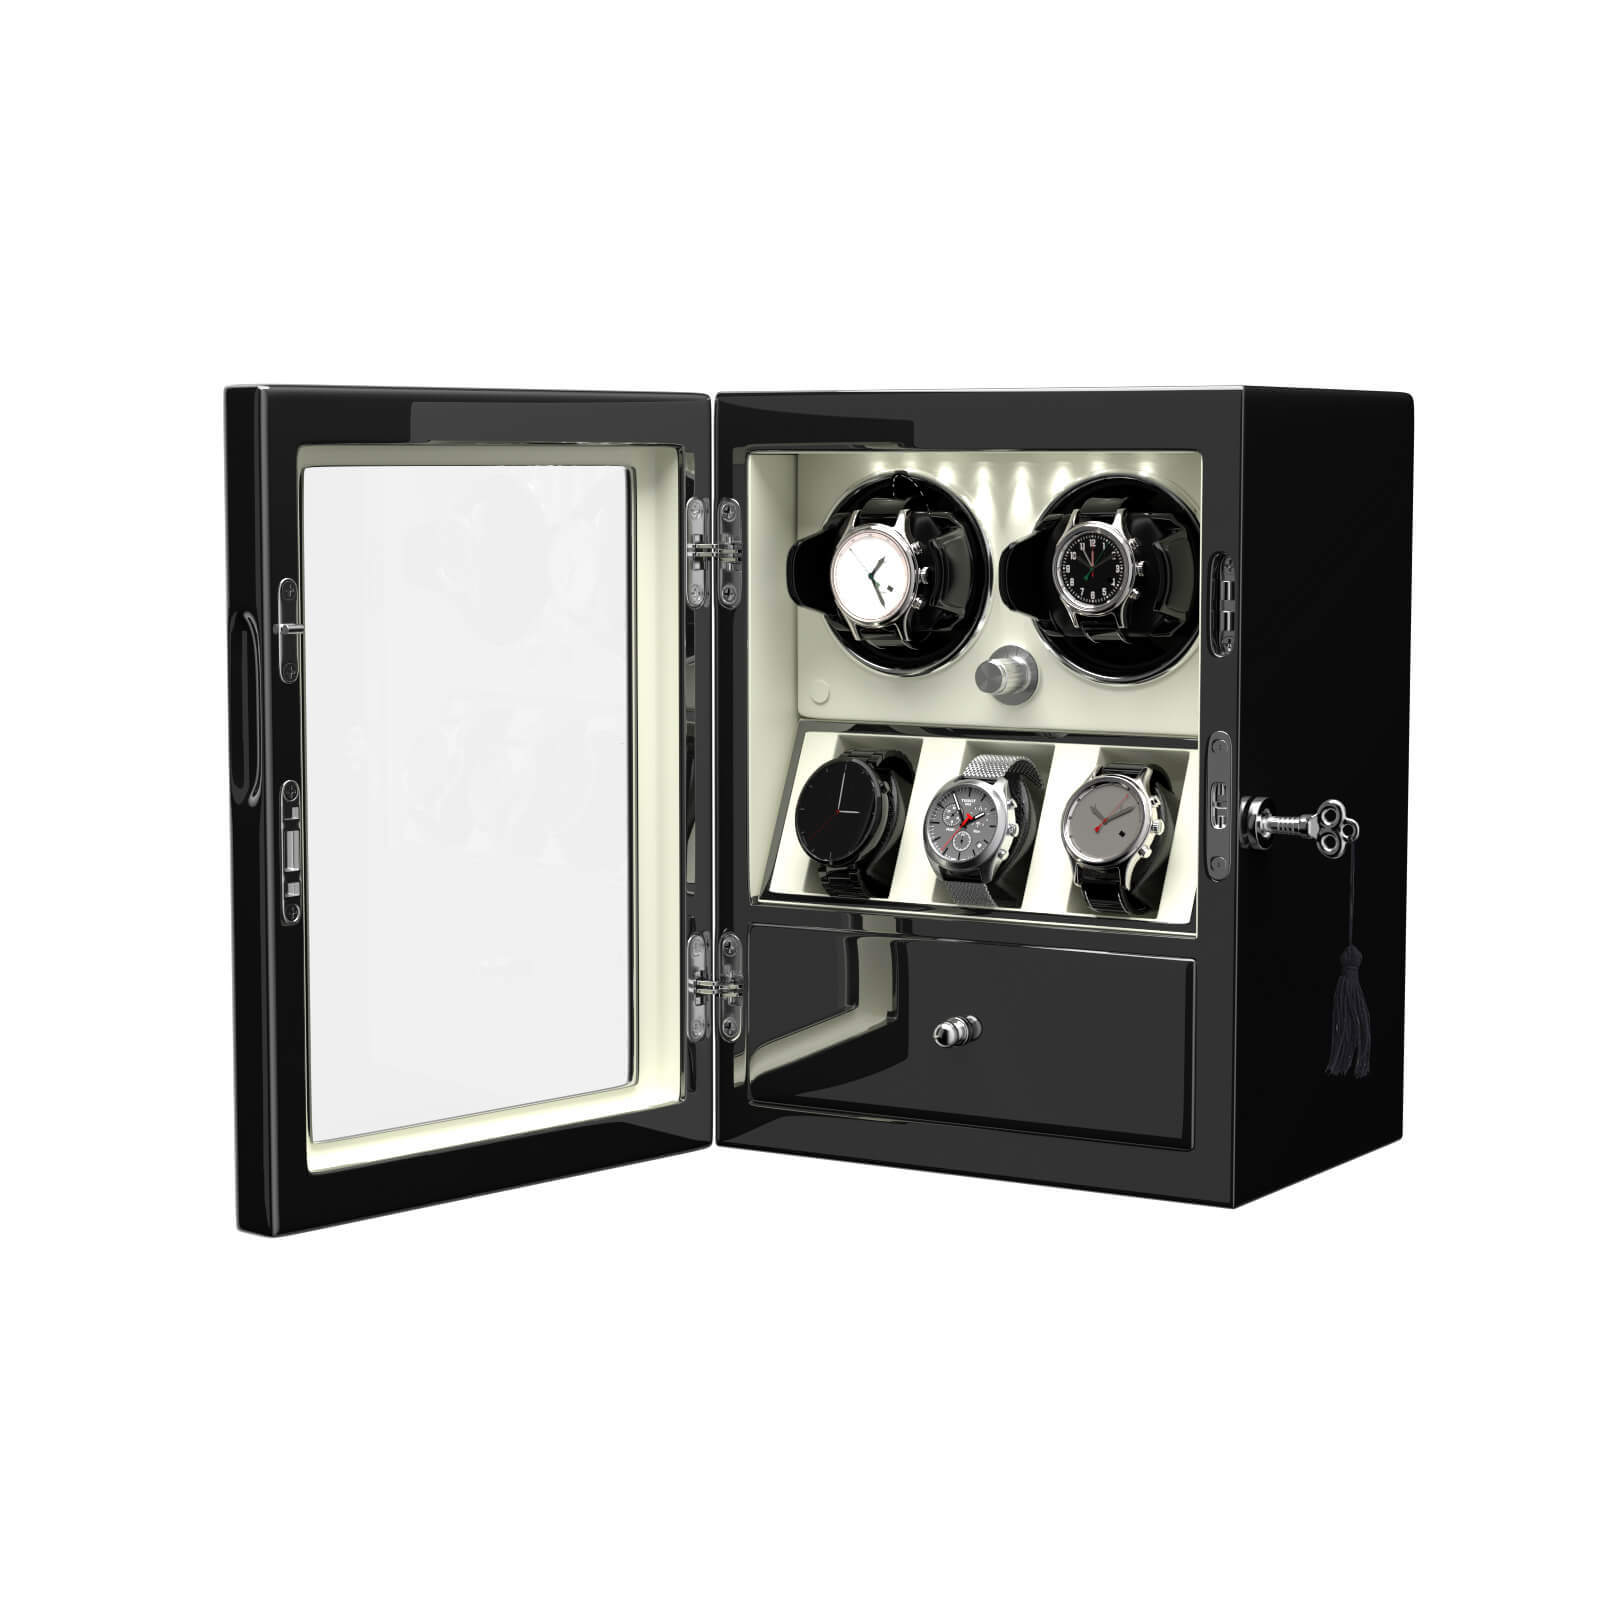 Compact 2 Watch Winders with 3 Watches Organizer Jewellery Display - Off White